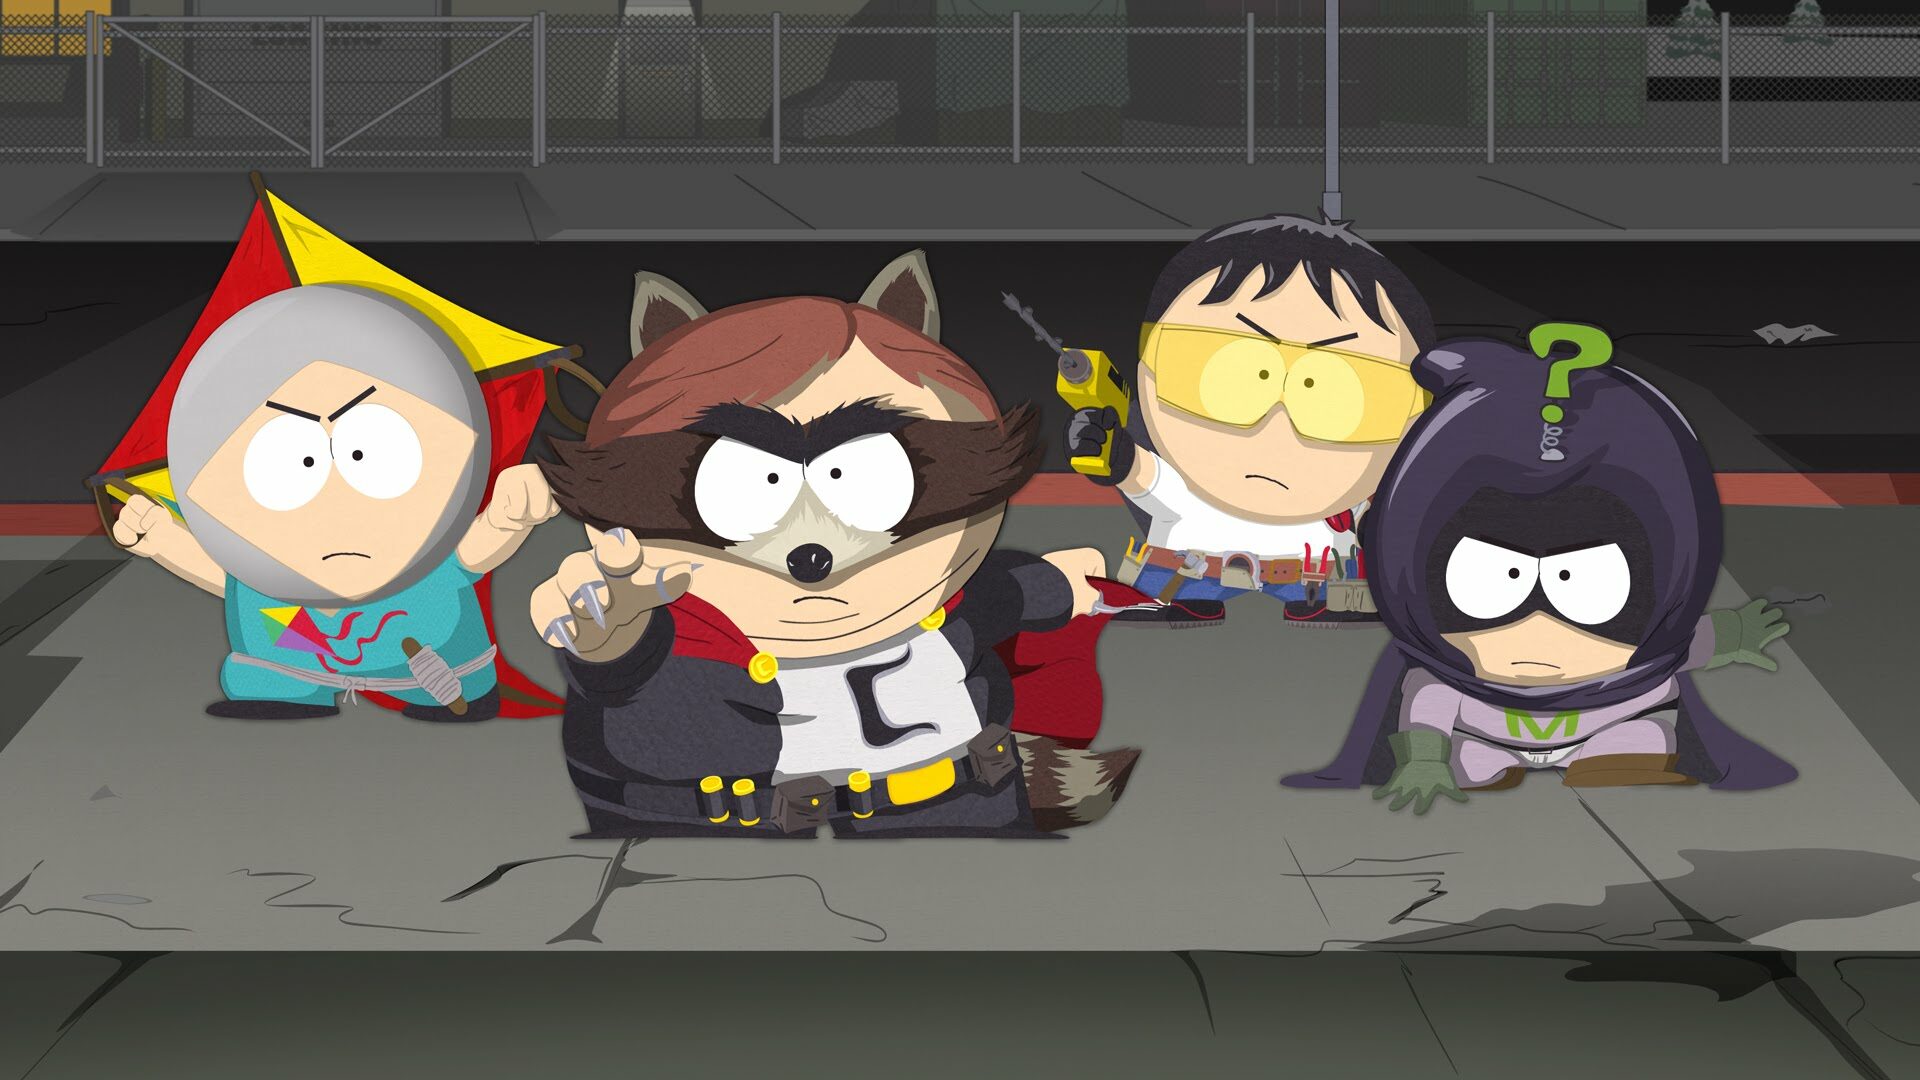 E3 2015: South Park: The Fractured But Whole Announced